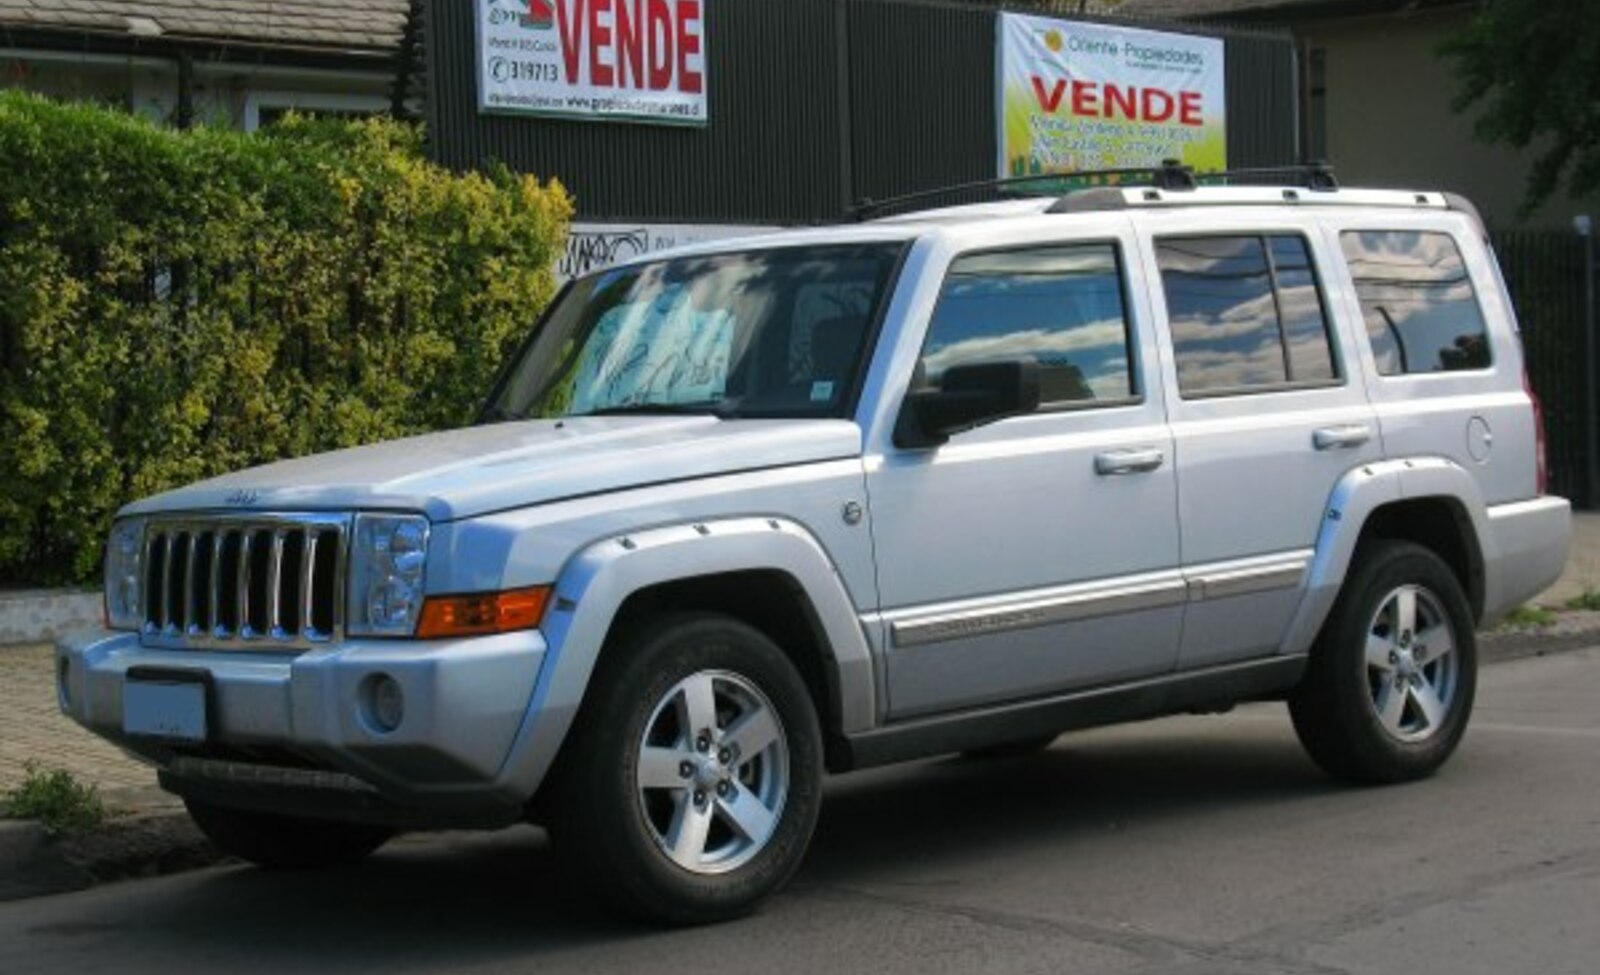 Jeep Commander 4.7 i V8 (231 Hp) 4WD Automatic 2006, 2007, 2008, 2009, 2010